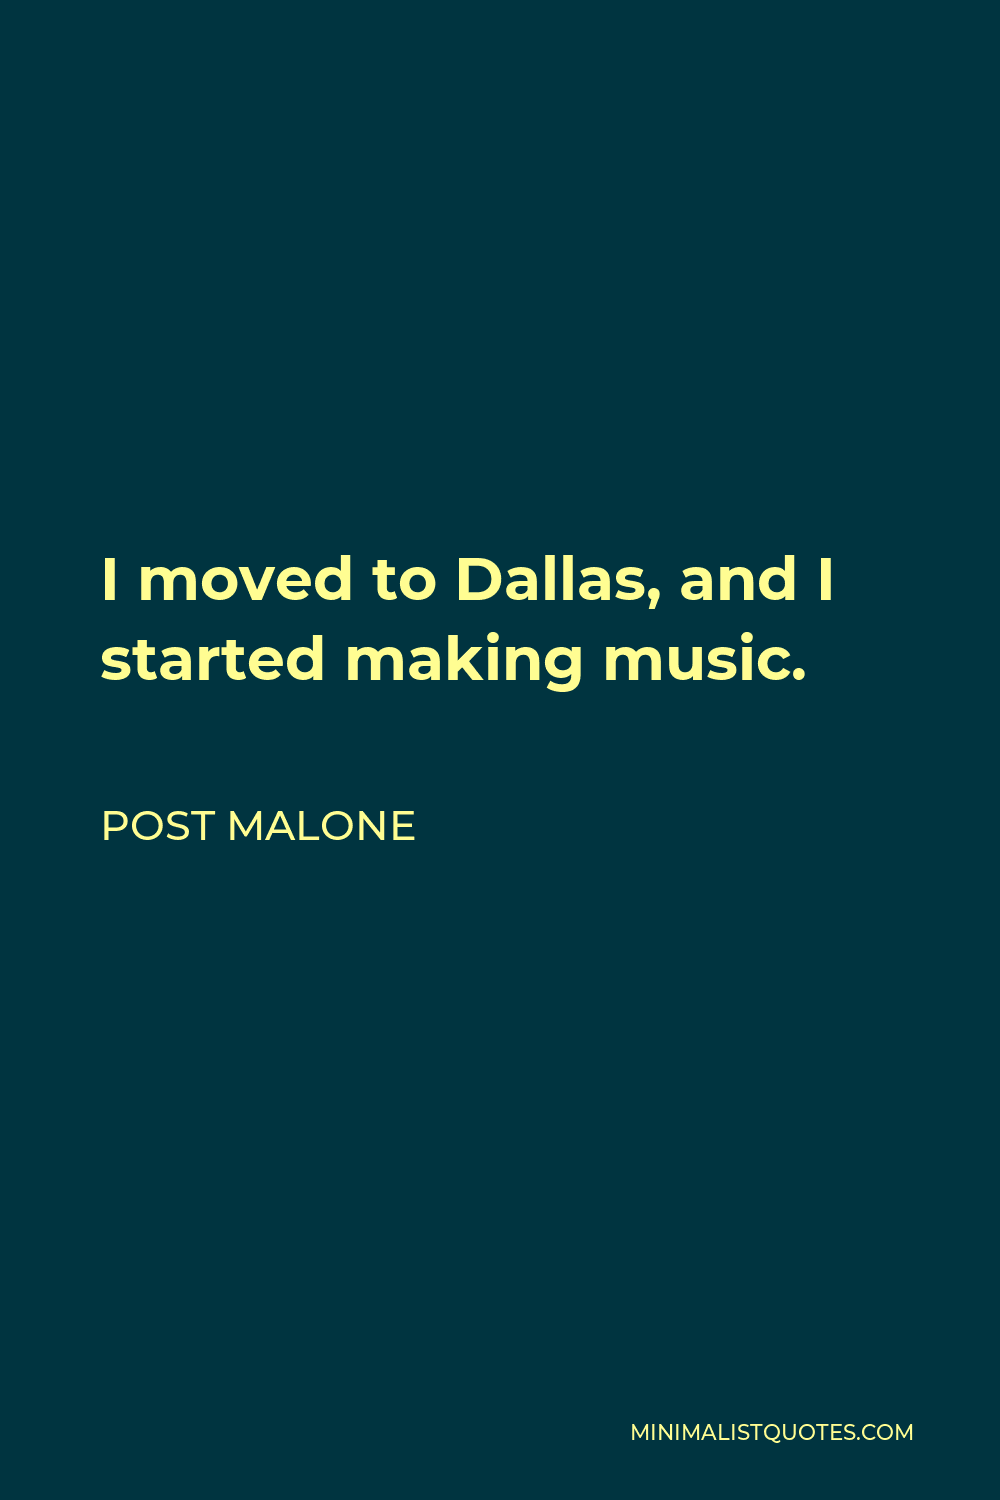 Post Malone Quote - I moved to Dallas, and I started making music.